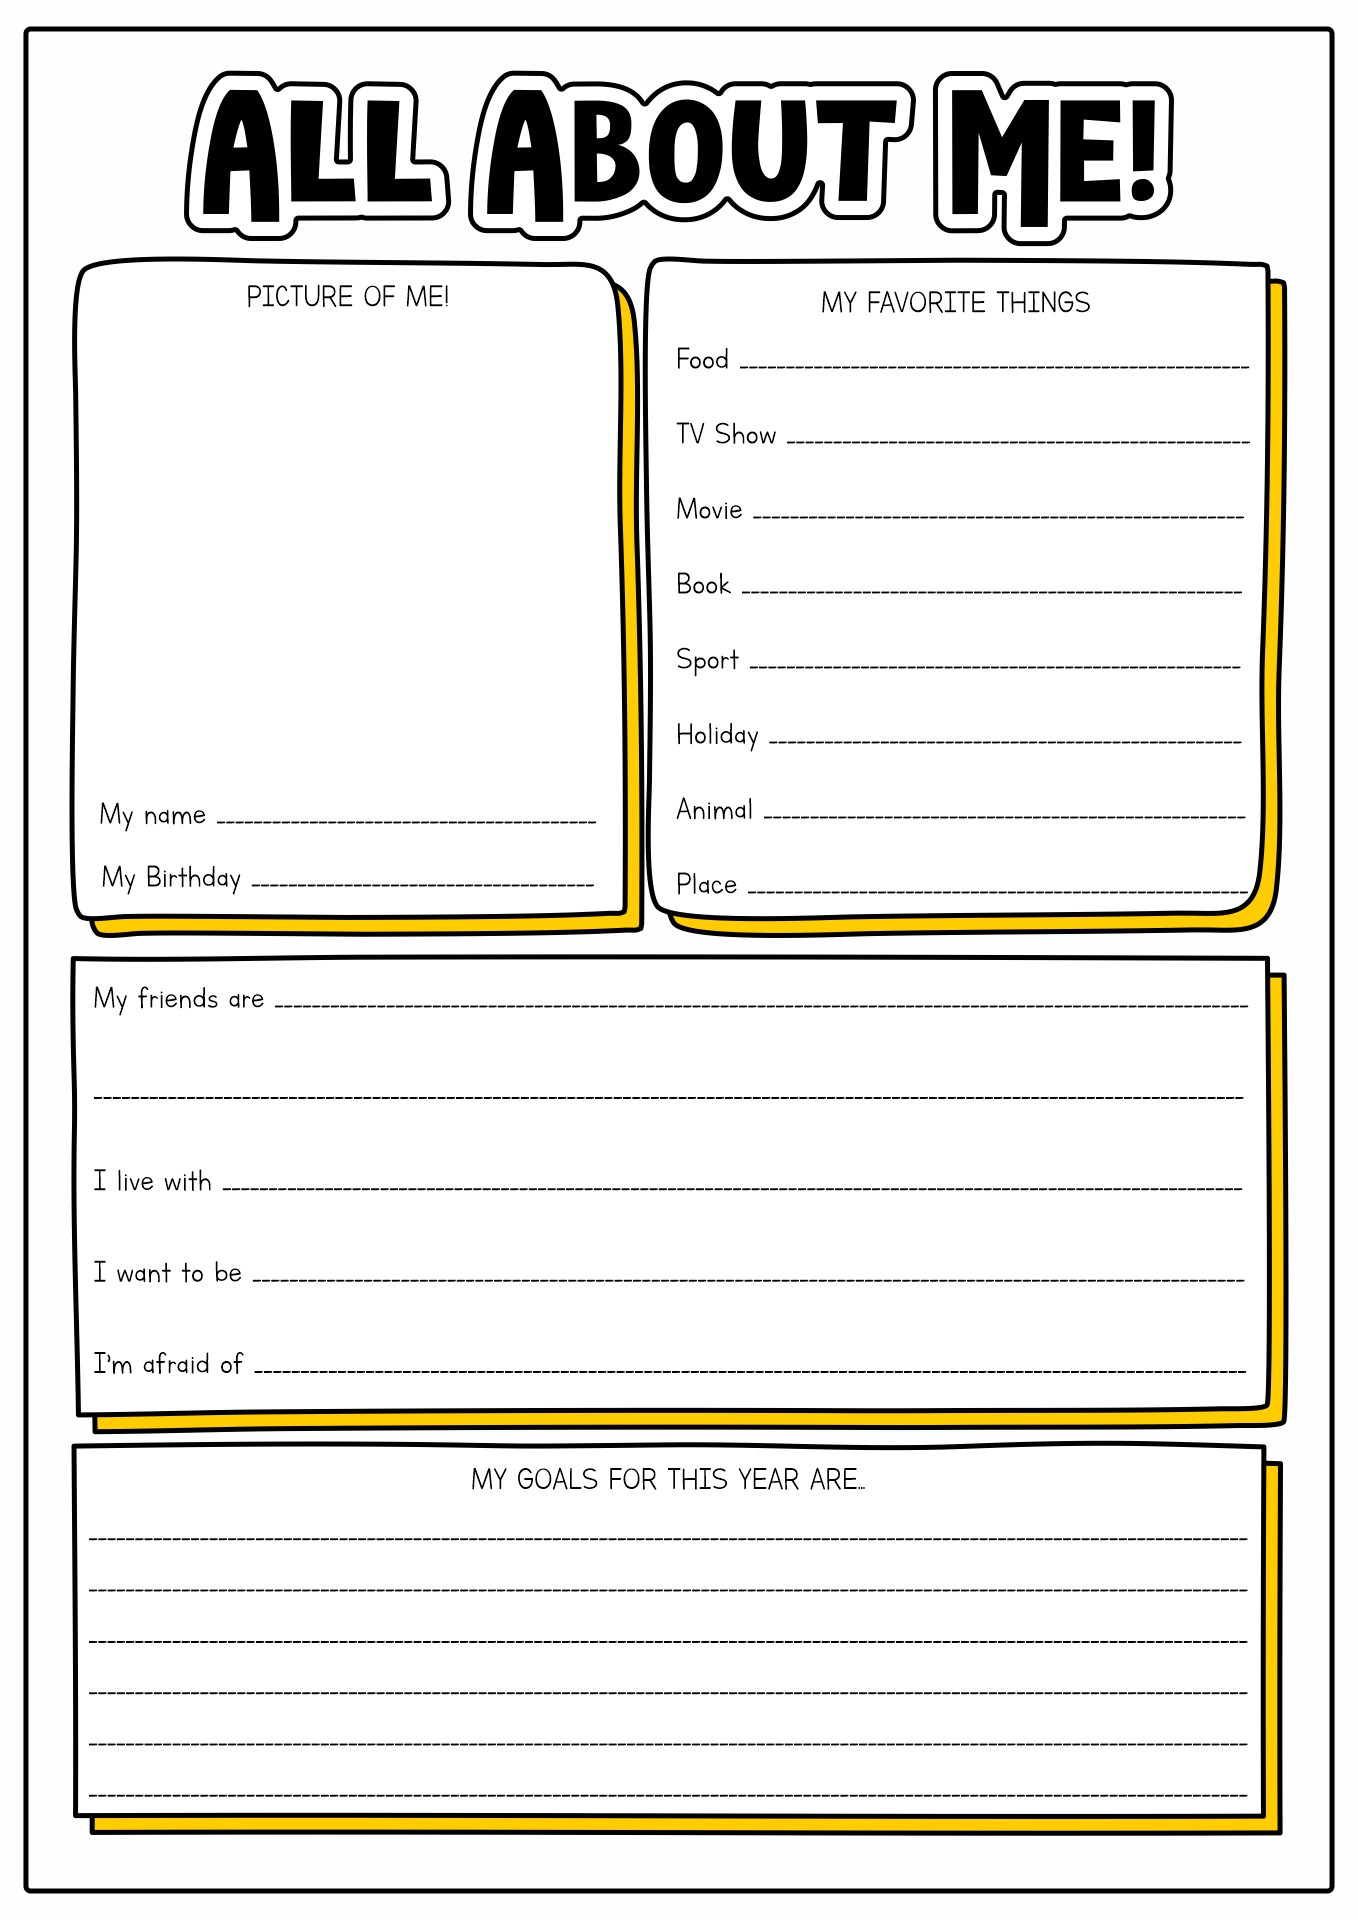 14 Best Images of All About Me Printable Worksheet For Adults All